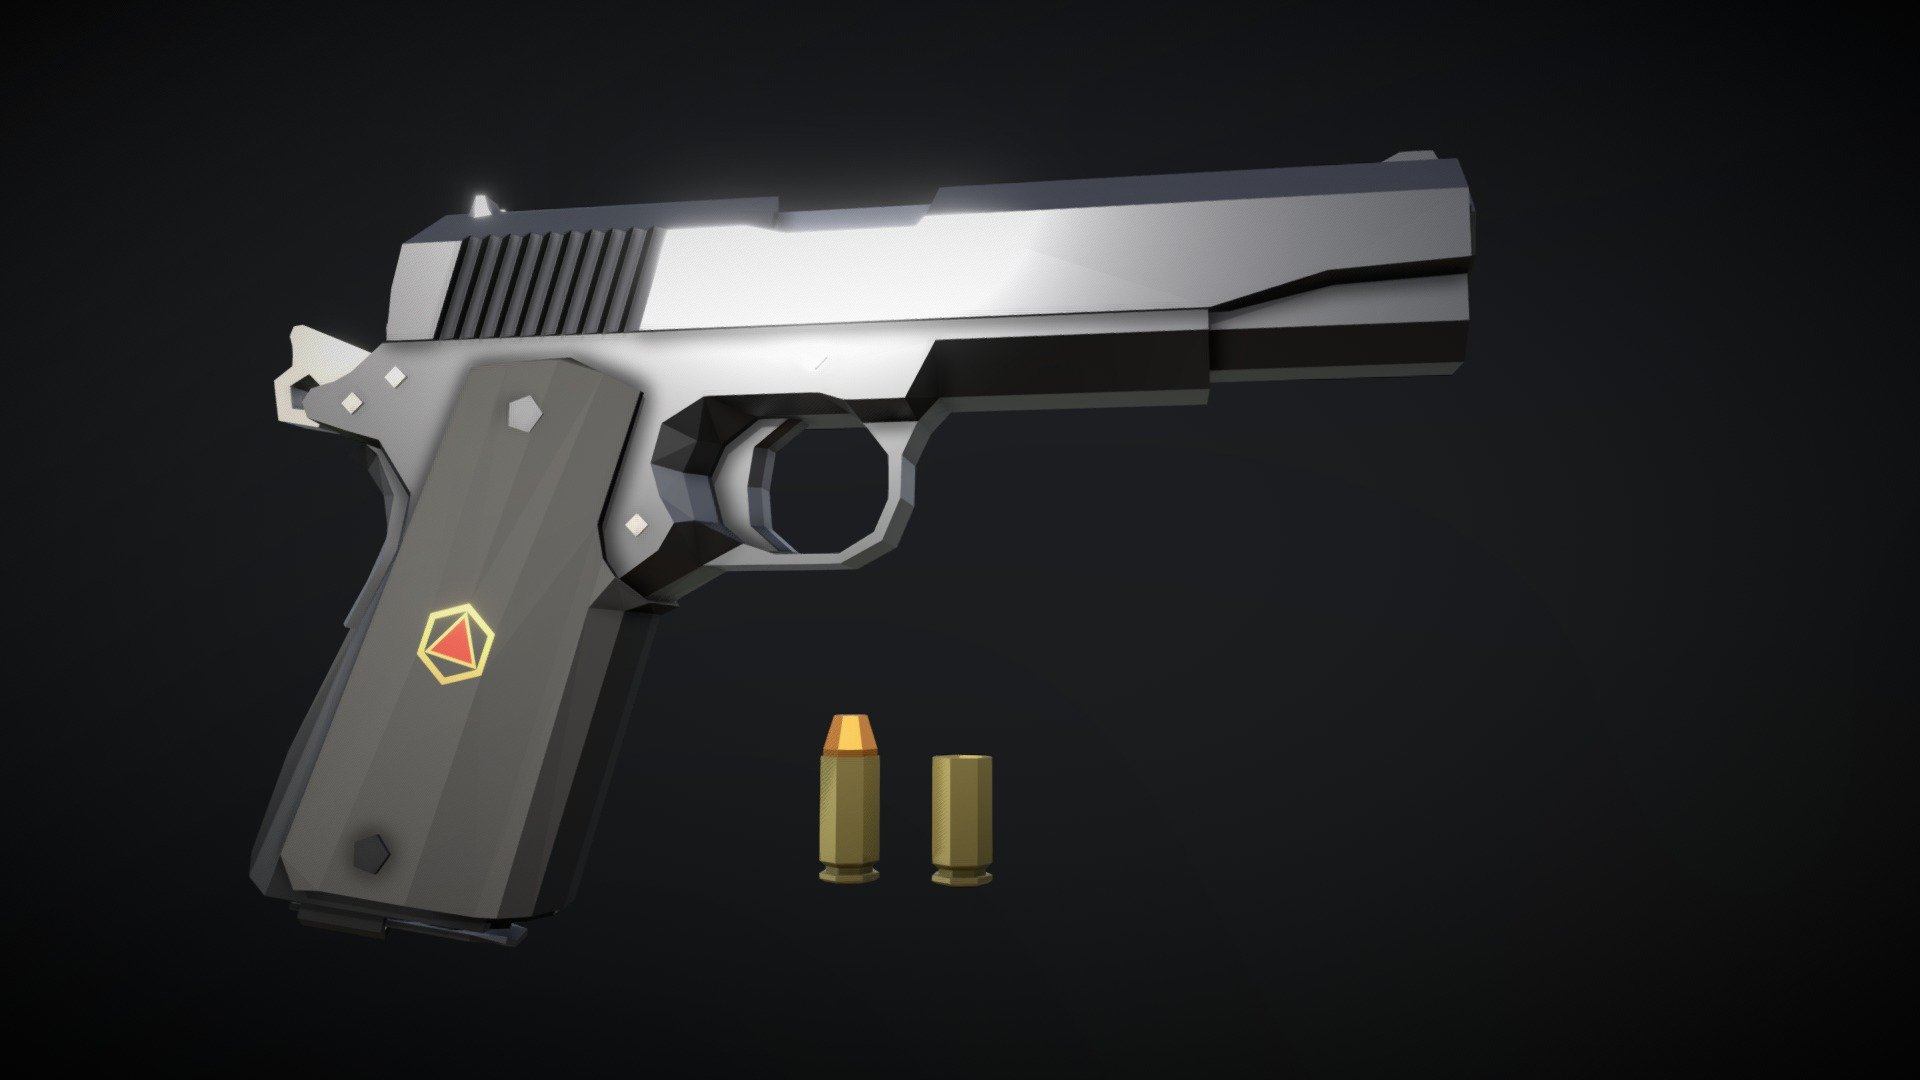 Low-Poly model of a Colt Delta elite, a 1911 variant chambered in .40 S&amp;W, a cartridge that is smaller, yet more powerful than .45 ACP. the magazine holds 9 rounds of ammunition, the rest of the pistol is identical to a normal 1911, except for the more ergonomic grip and the smoother, higher quality finish 3d model